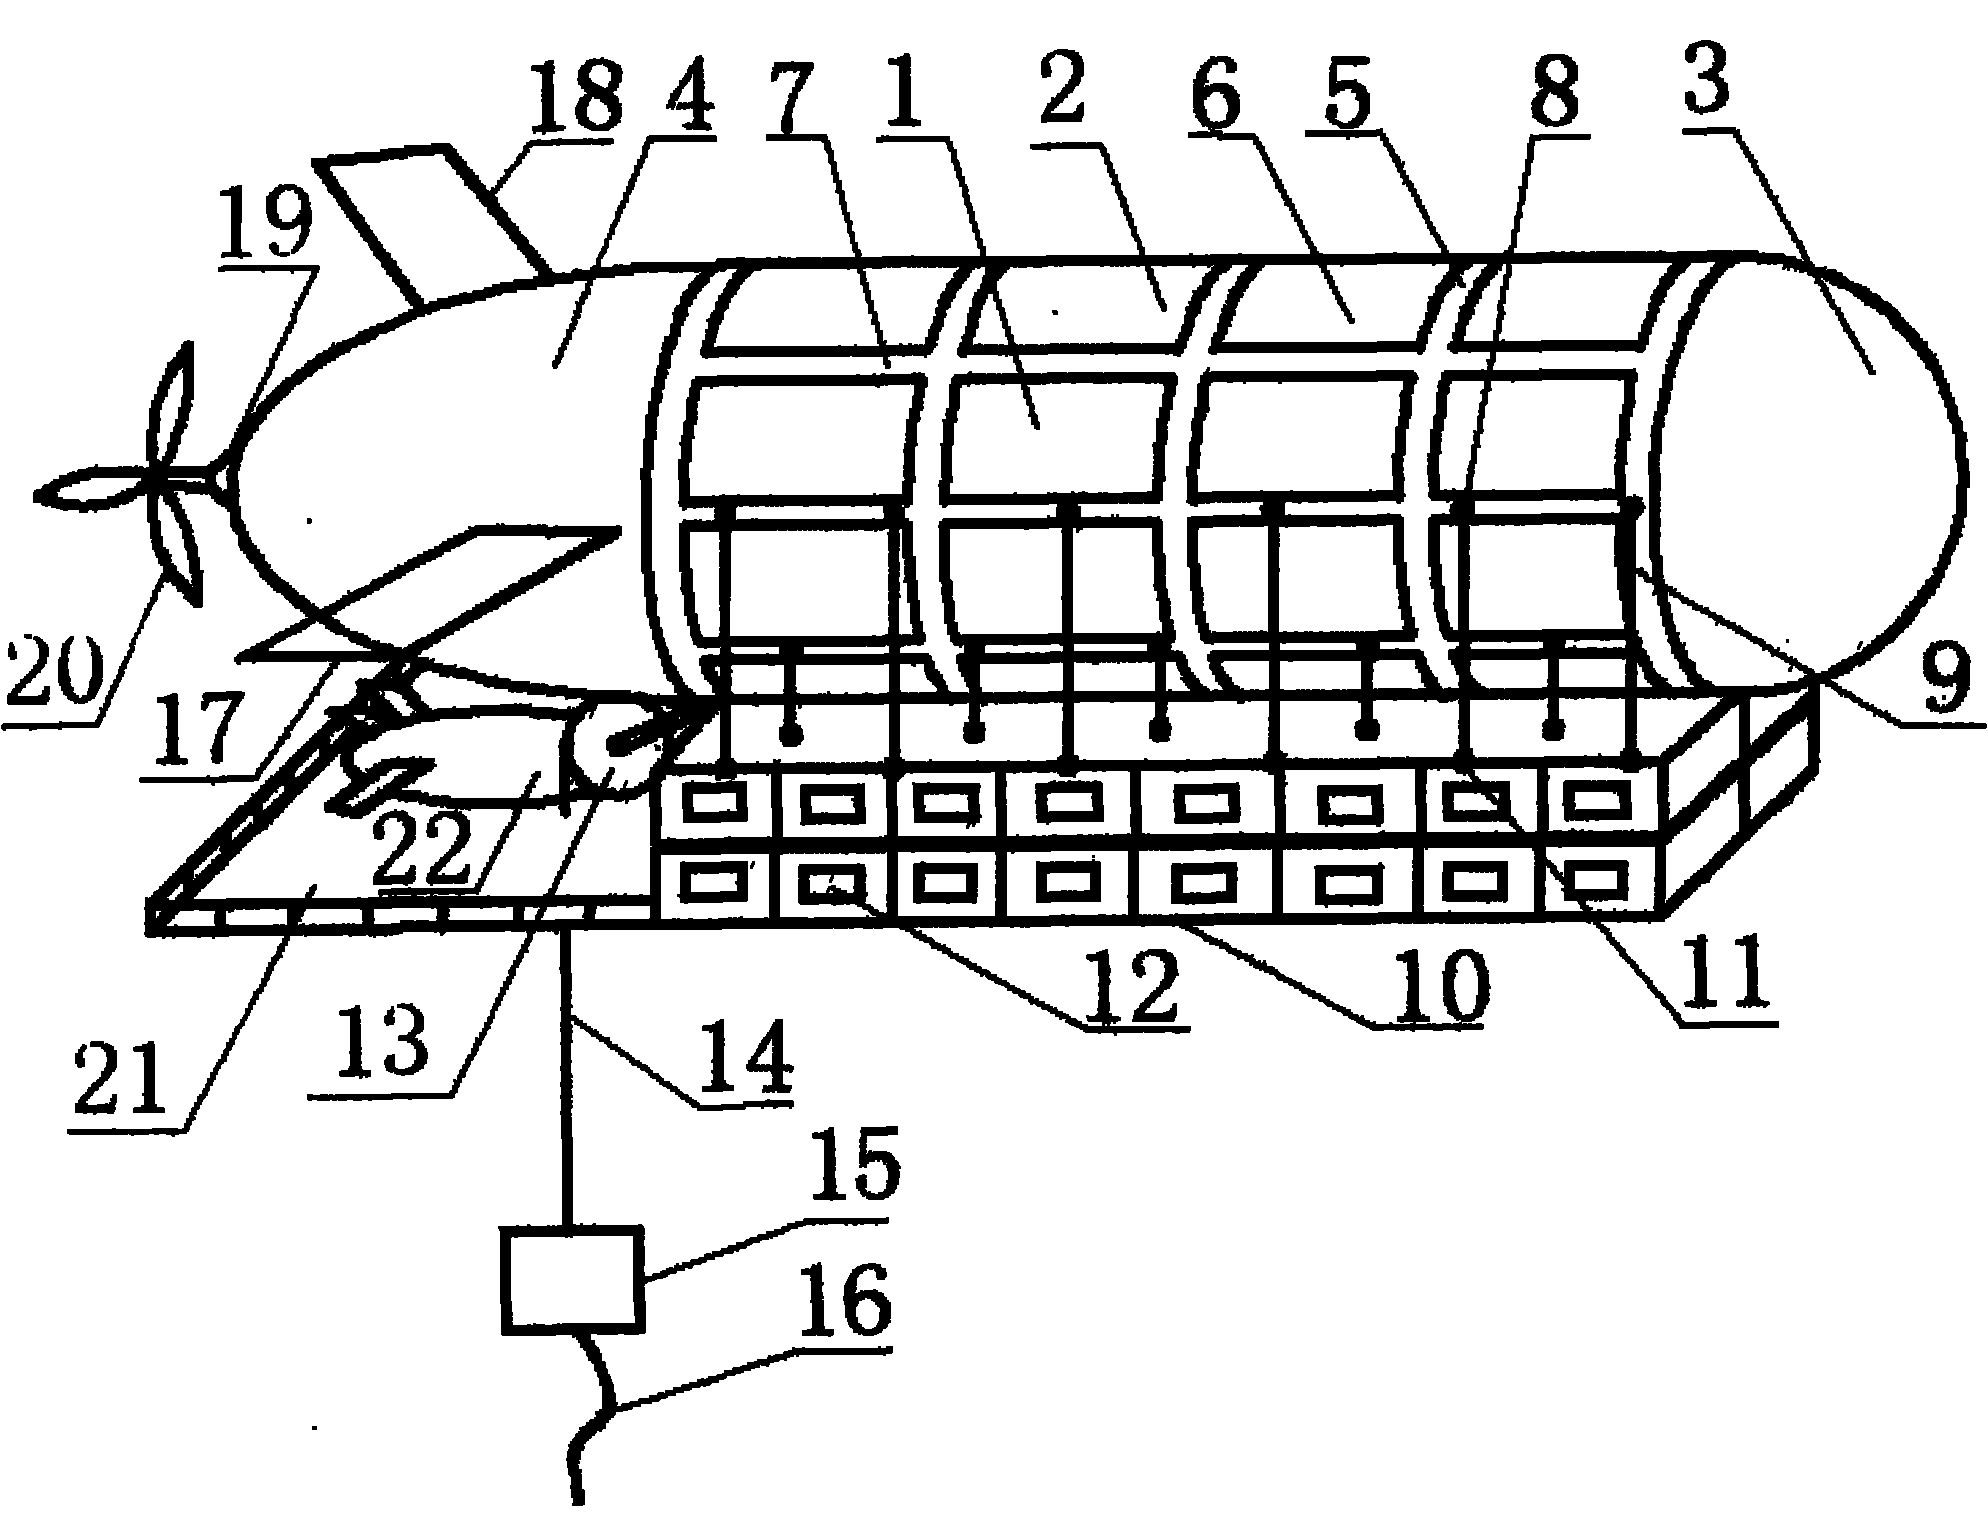 Large-scale aerostat with metal structure